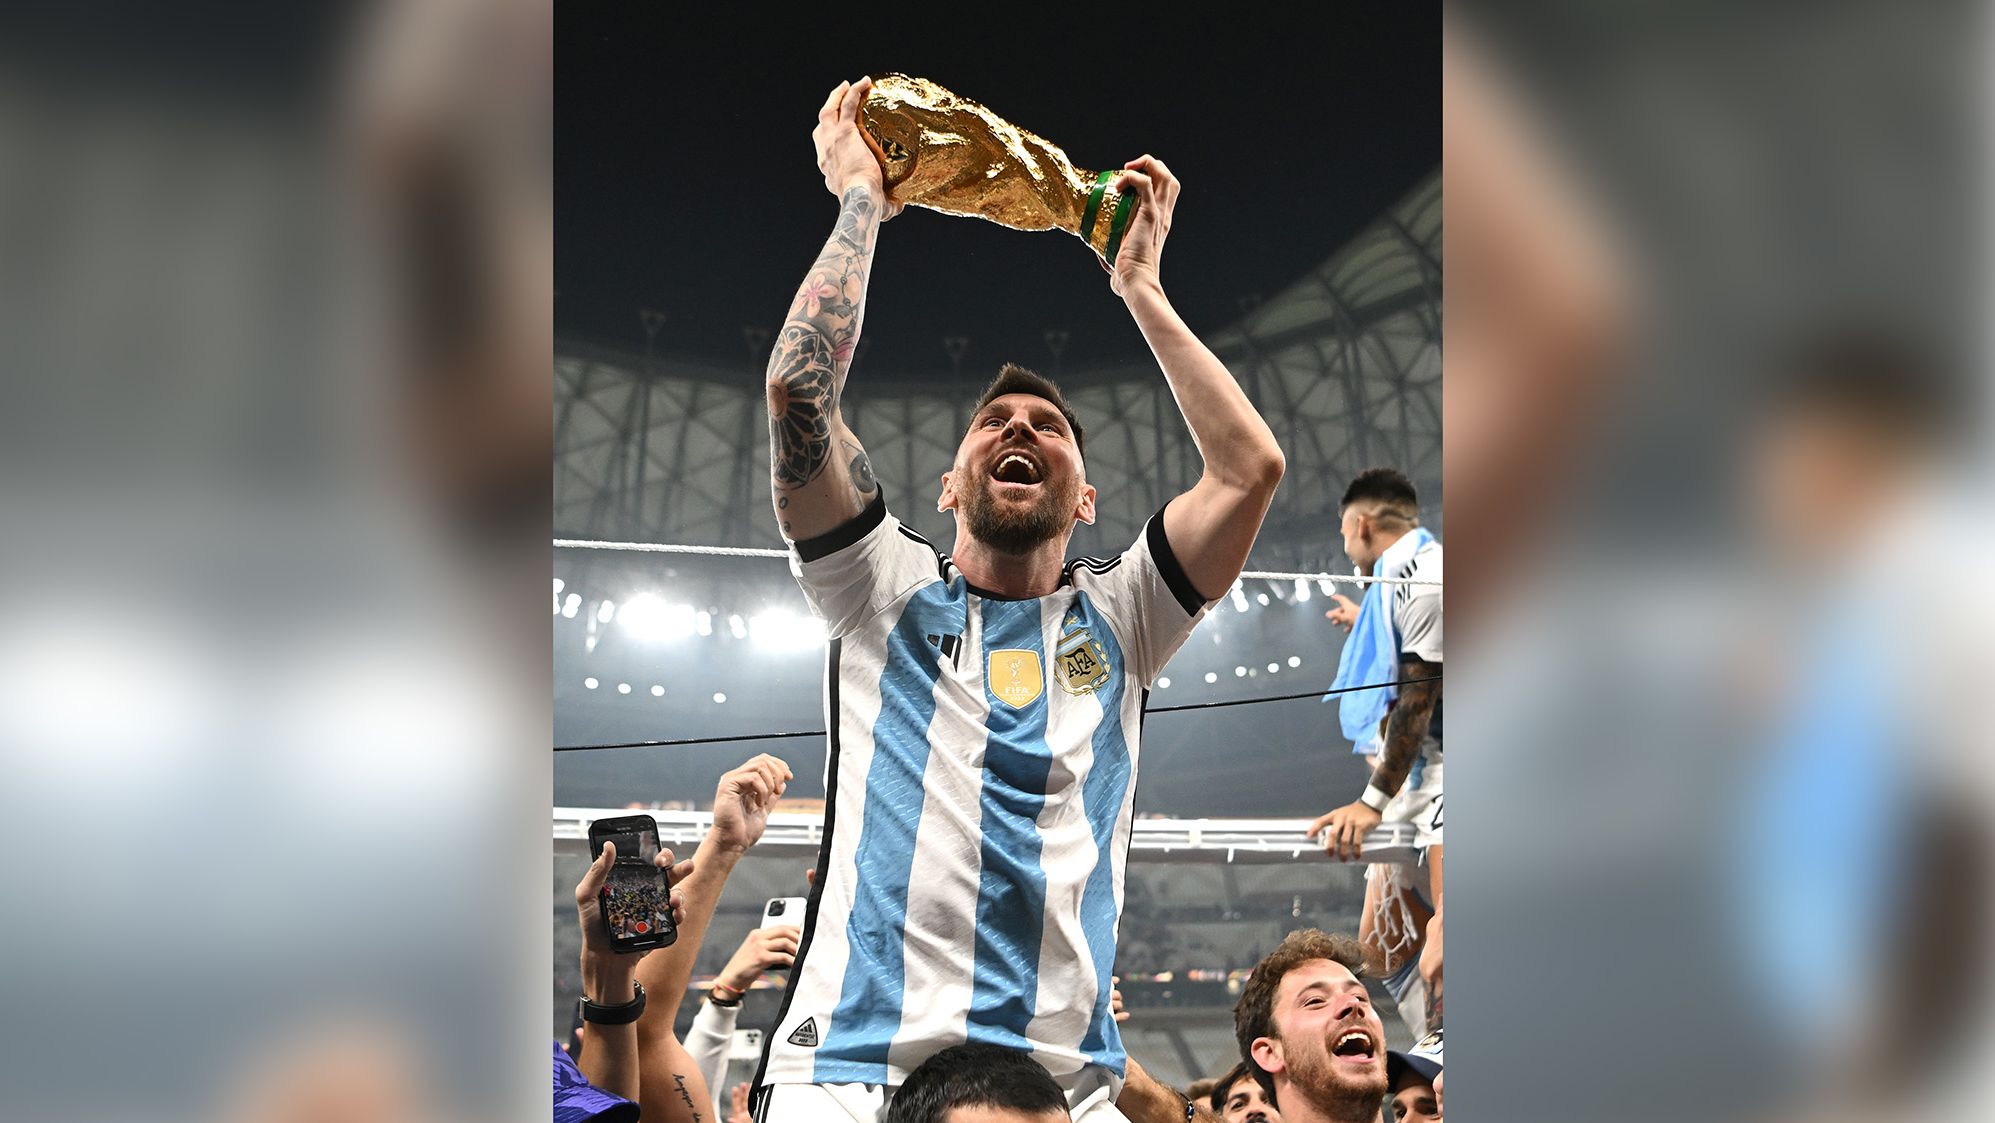 This photo of Lionel Messi taken by Shaun Botterill has become the most-liked post in Instagram's history.